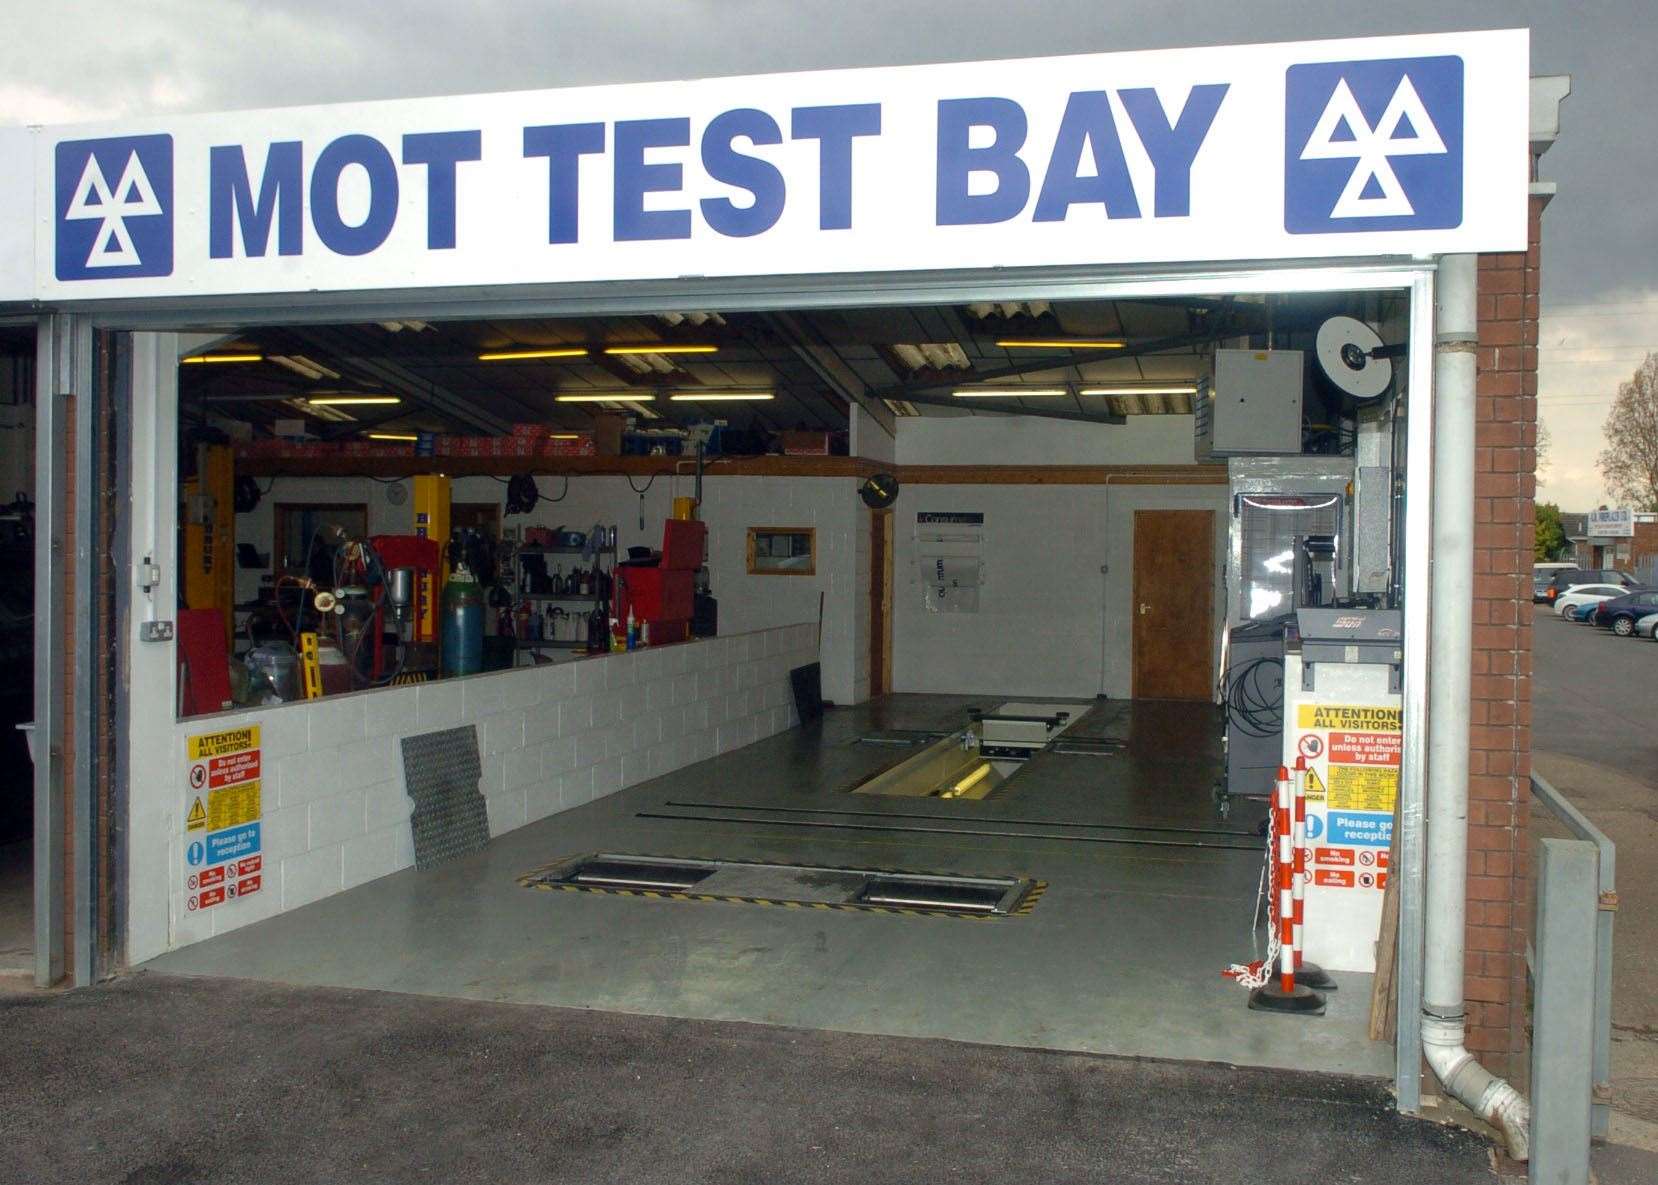 If a vehicle is more than three years old it requires an fresh MOT inspection each year